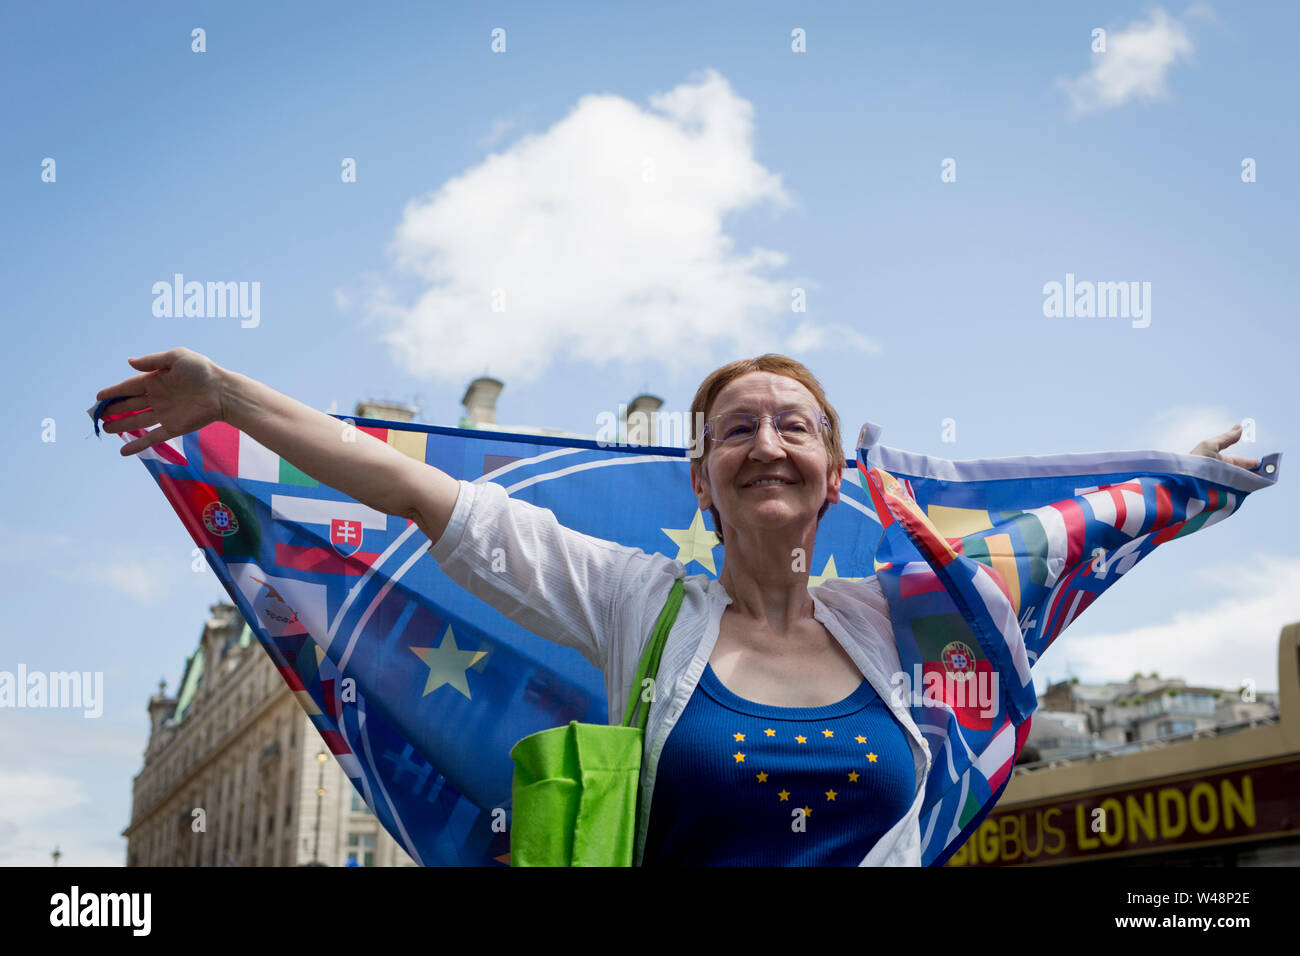 Days before the new leader of the Conservative Party and next Prime Minister of the UK is elected by its members (and expected to be Boris Johnson), the last weekend of Theresa May's unsuccessful Brexit from the European Union saw a March for Change protest with pro-EU Remainers marching through the capital demanding an end to Brexit and a No to a Johnson PM, on 20th July 2019, in London, England. Stock Photo